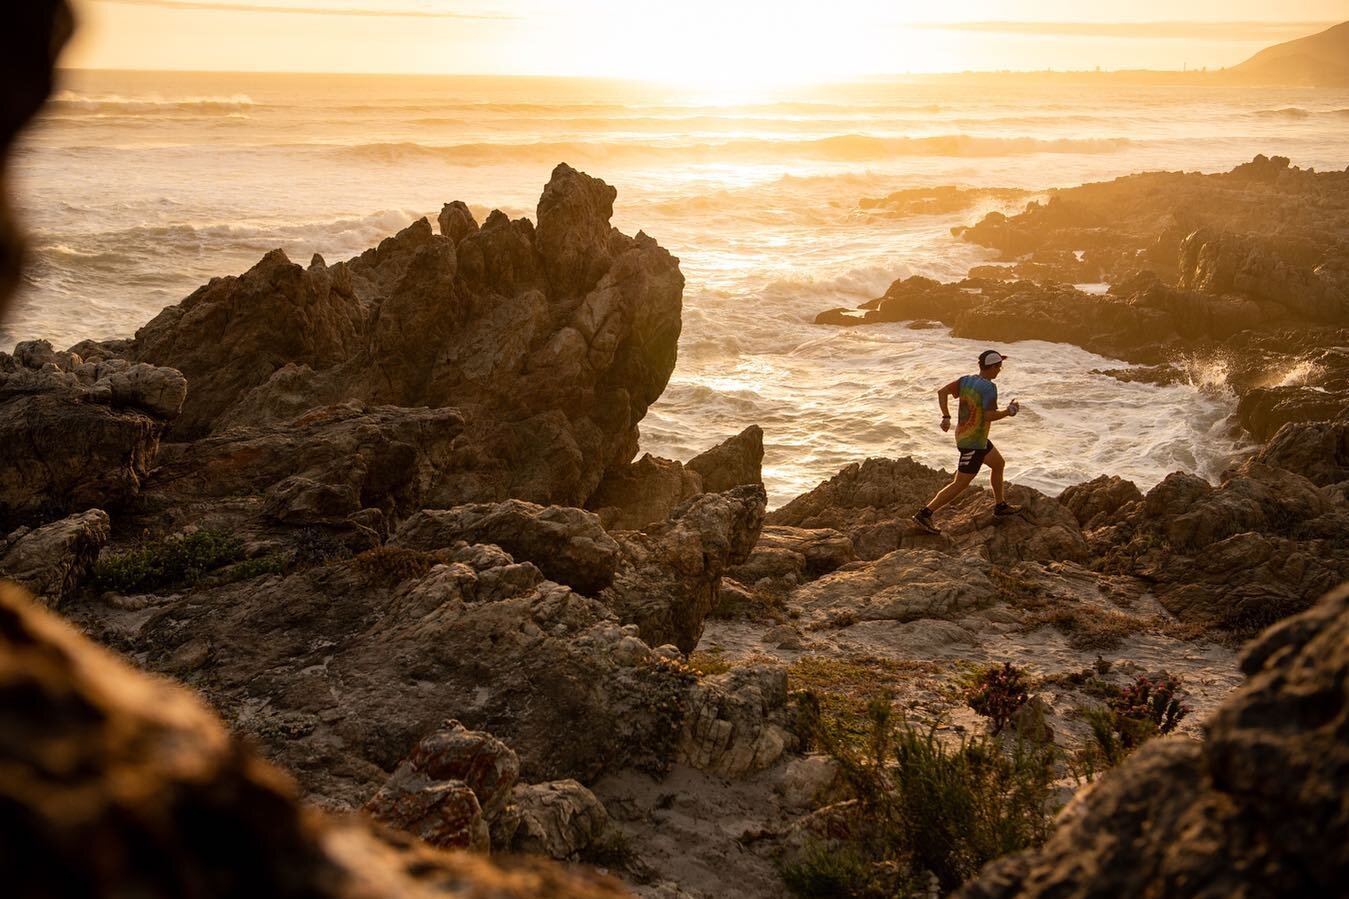 I&rsquo;m excited to line up for my first trail race in a long while! 

The @fullsendtrail series has been a three part segment series hosted in Cape Town and Stellenbosch over the past three months. The top 20 men and women line up for the grand fin